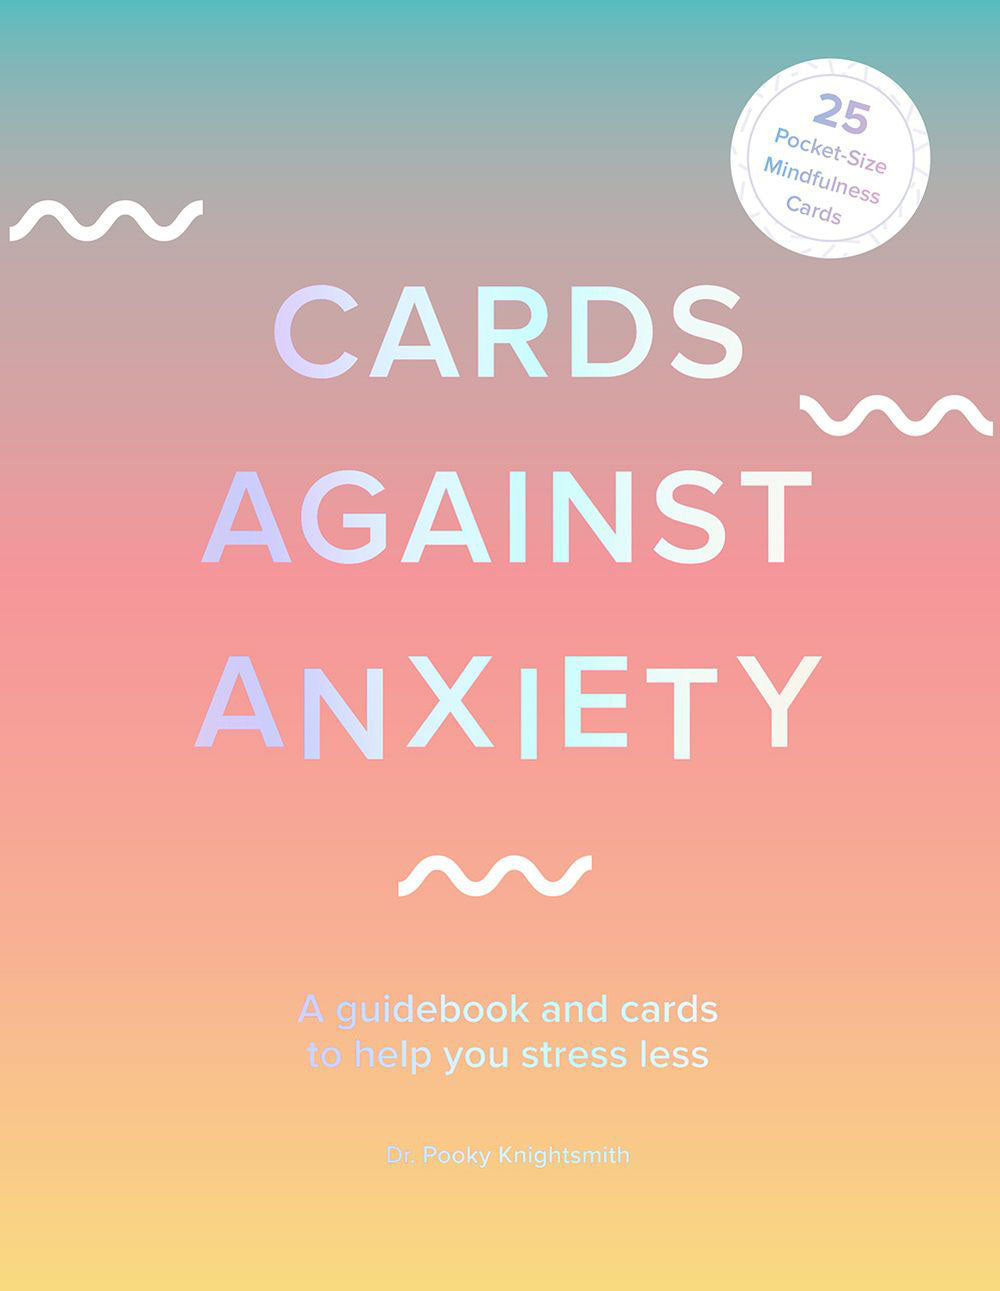 Cards Against Anxiety (Guidebook & Card Set)